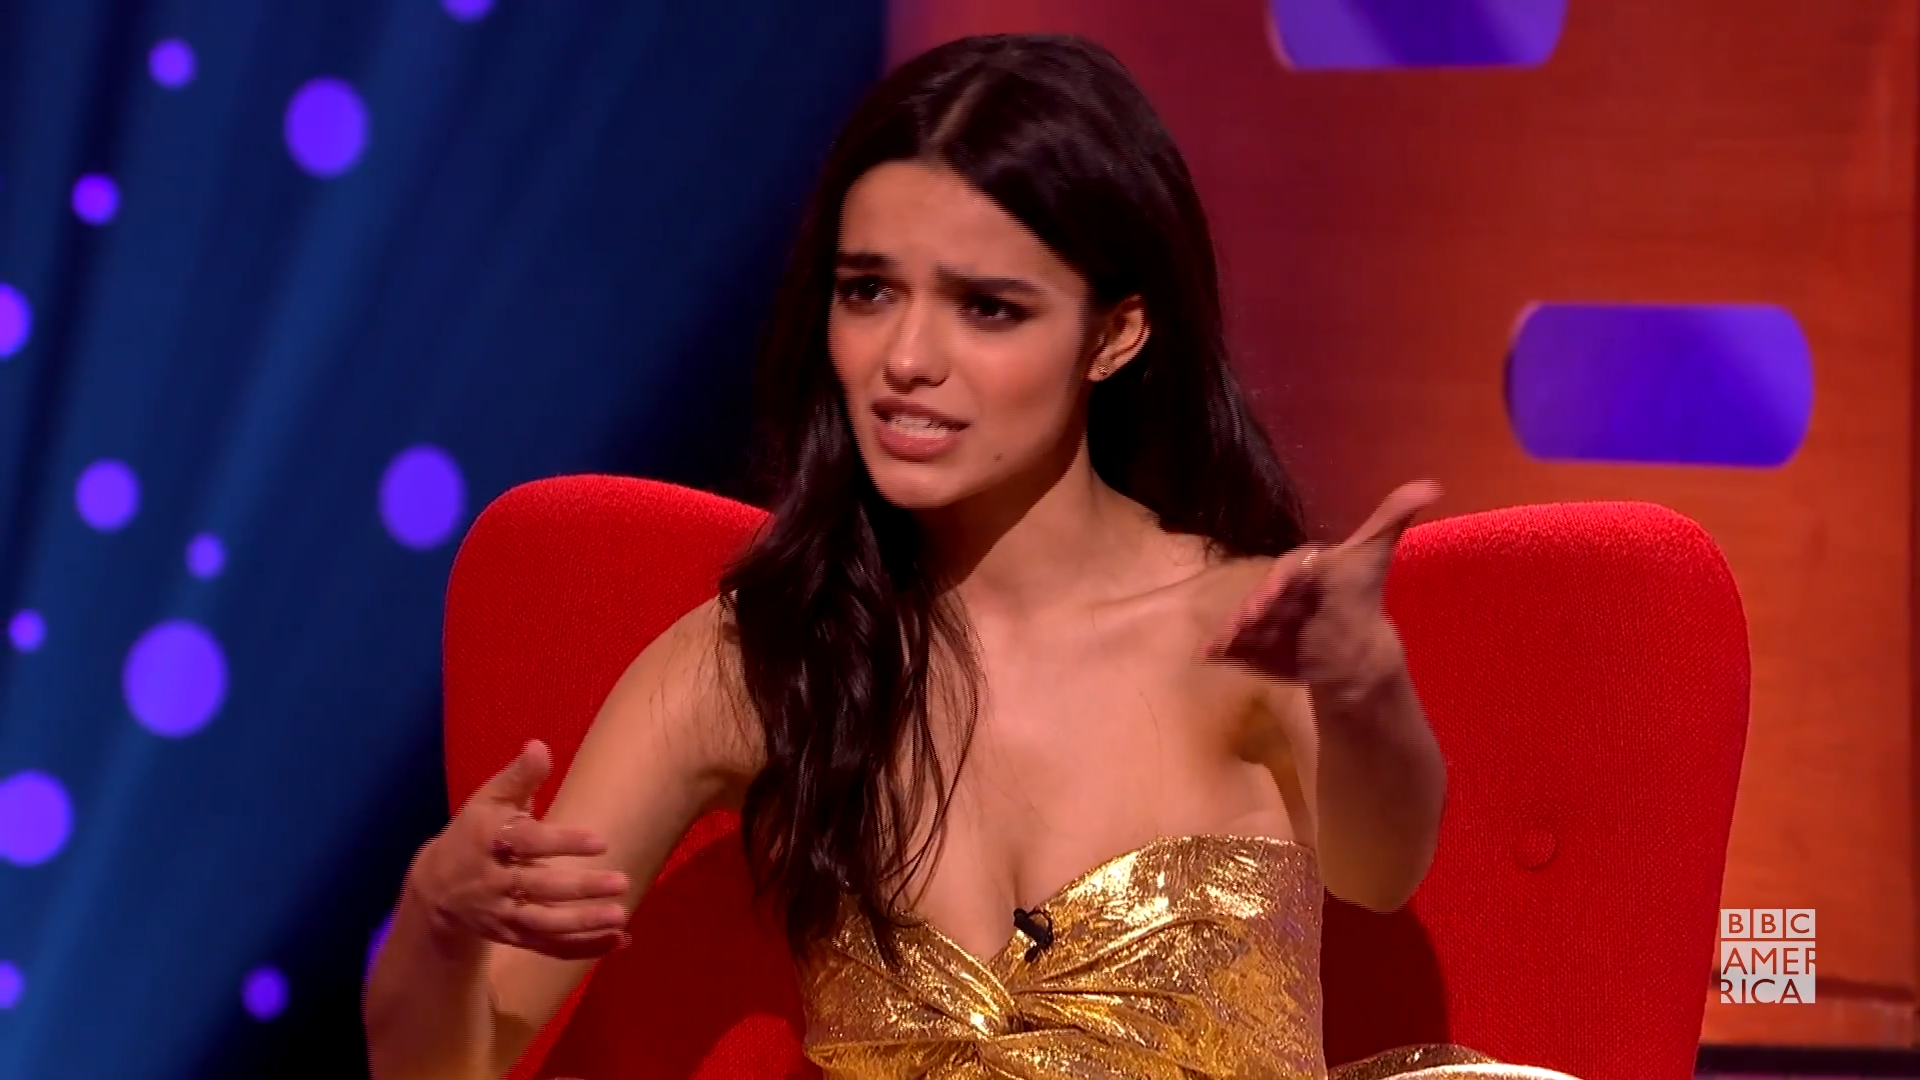 Watch Rachel Zegler’s Grueling Audition for ‘West Side Story’ | The Graham Norton Show Video Extras